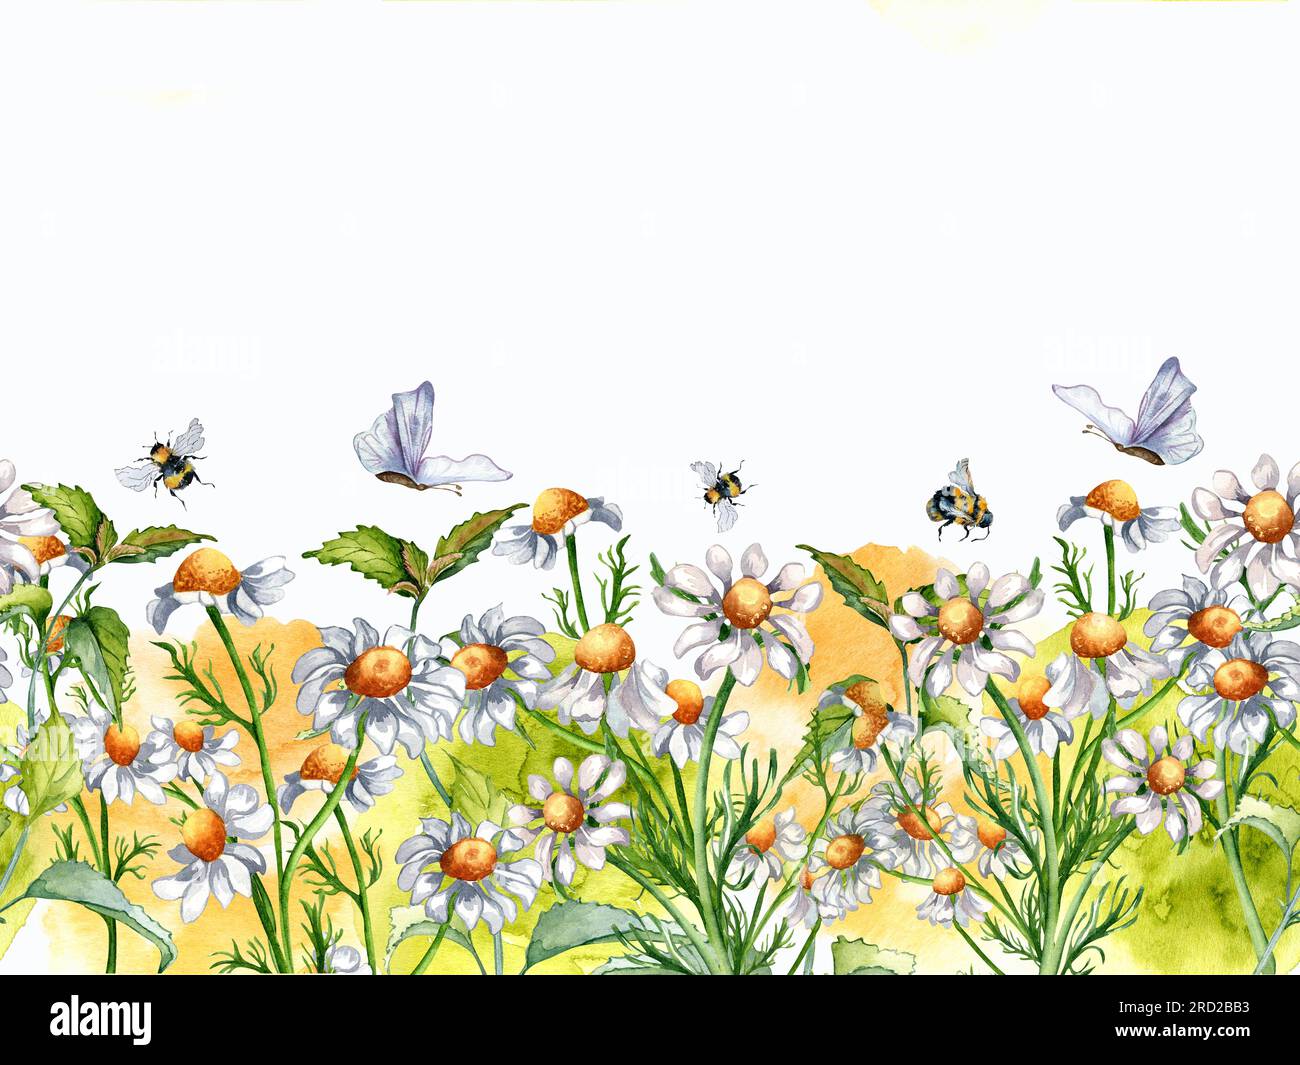 Seamless border of medicinal plants, watercolor splash, insects illustration isolated on white background. Daisy flower, bee, butterfly, nettle hand d Stock Photo